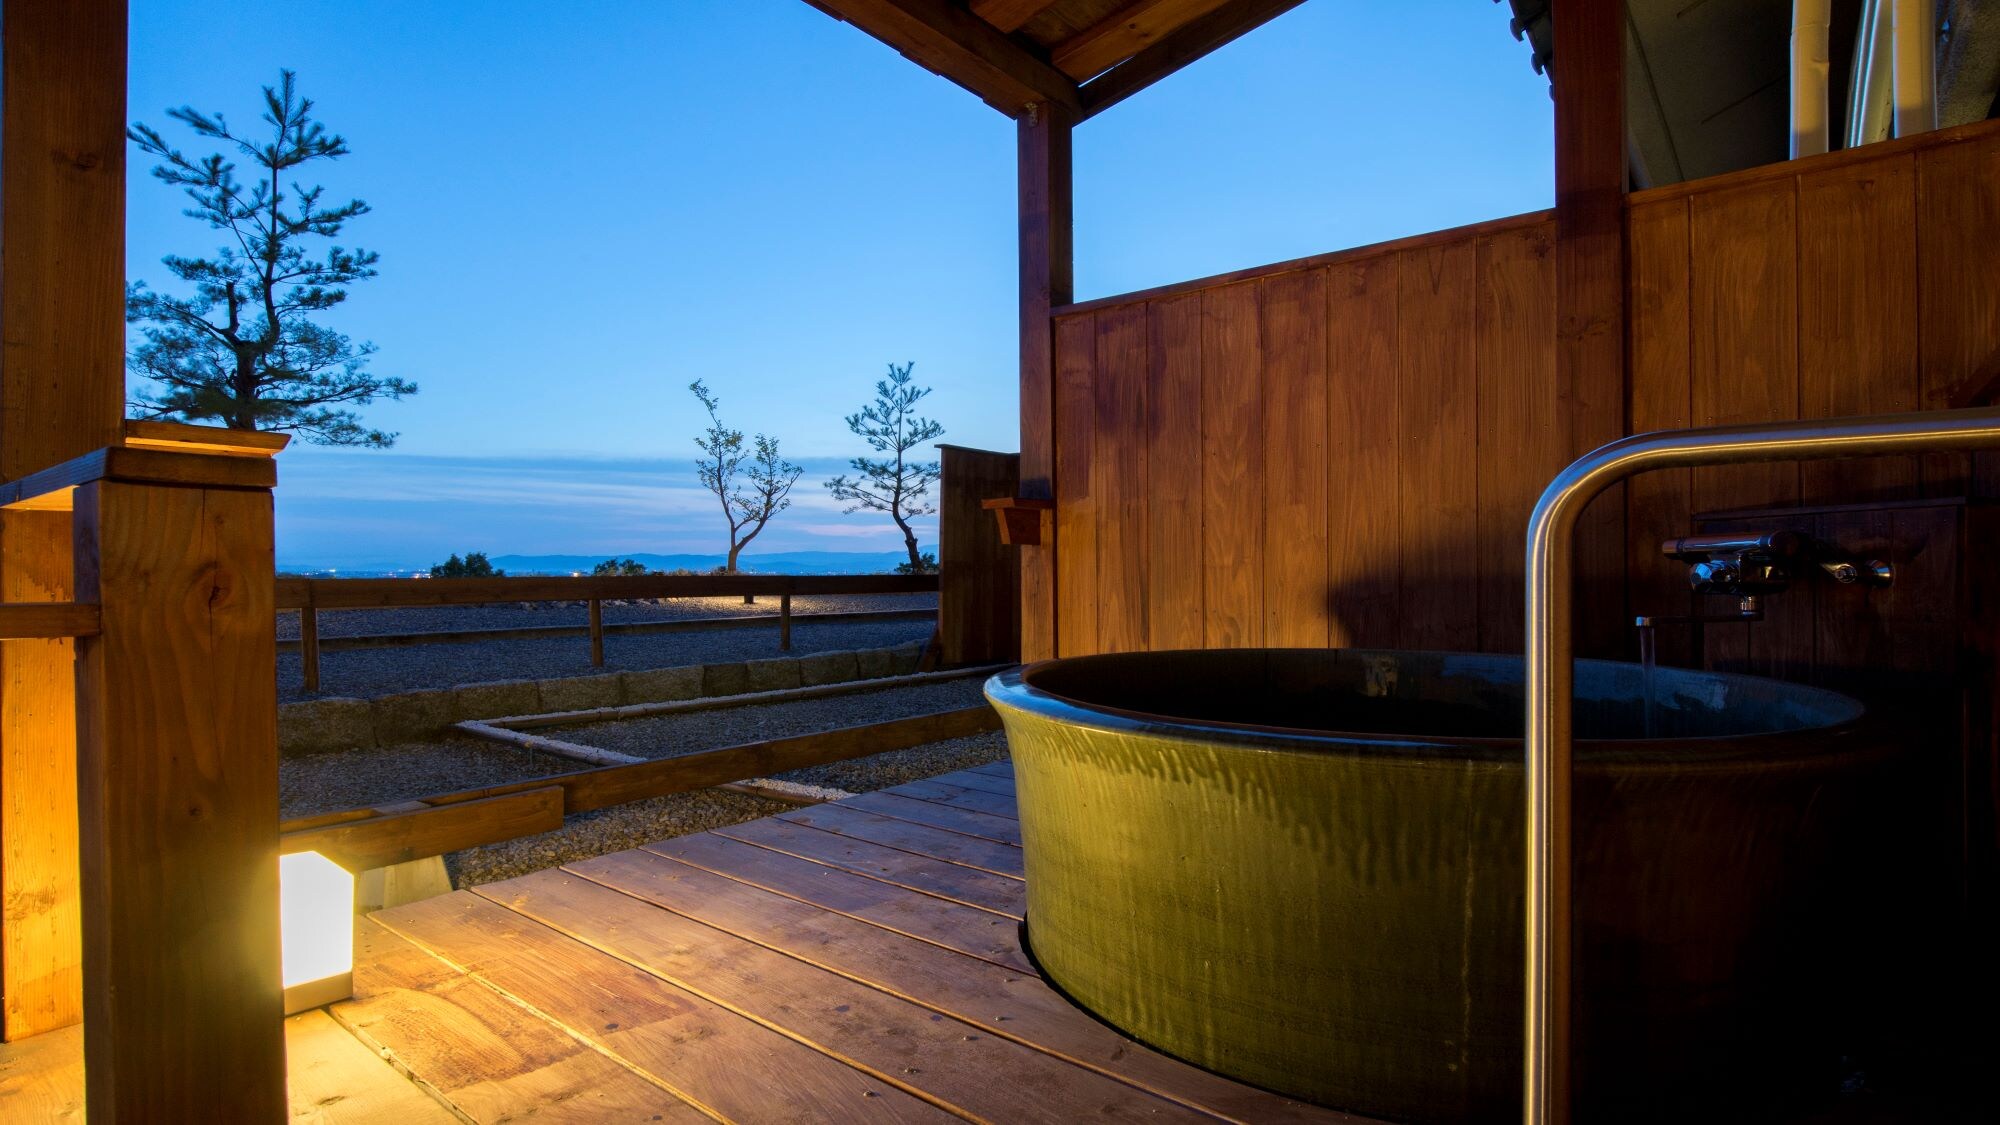 Japanese-Western style room with a superior open-air bath *An example of a guest room open-air bath